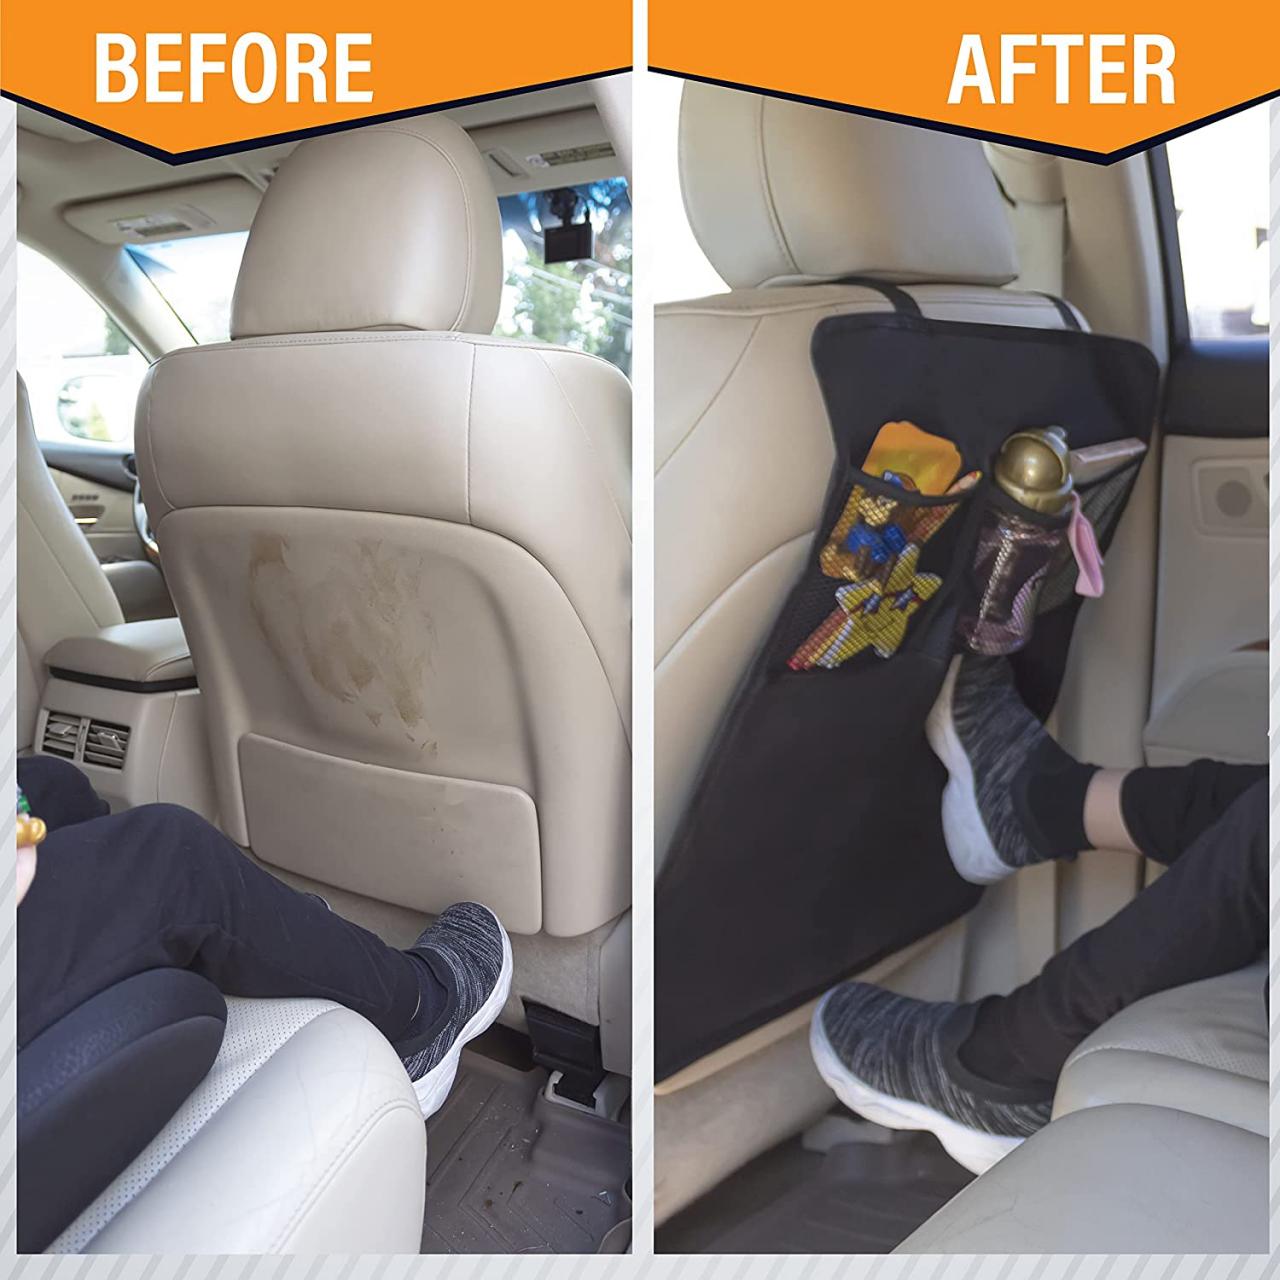 Buy EcoNour Car Back Seat Protector for Kids | Car Seat Cover for Babies |  2 Pack - Kick Mat Mesh Pocket Storage and Organizer | Car Accessories for  Back of Driver